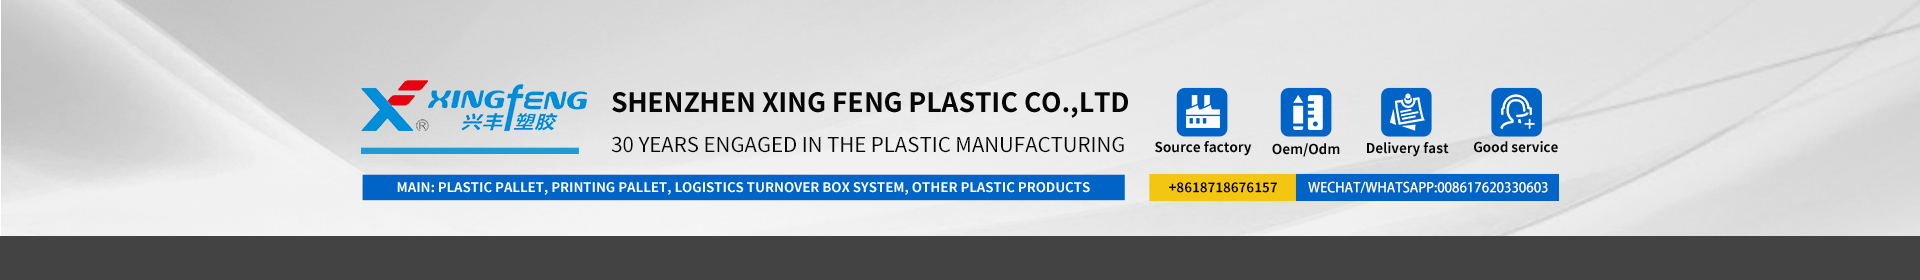 xingfeng plastic company is professinal in plastic products for 30 years